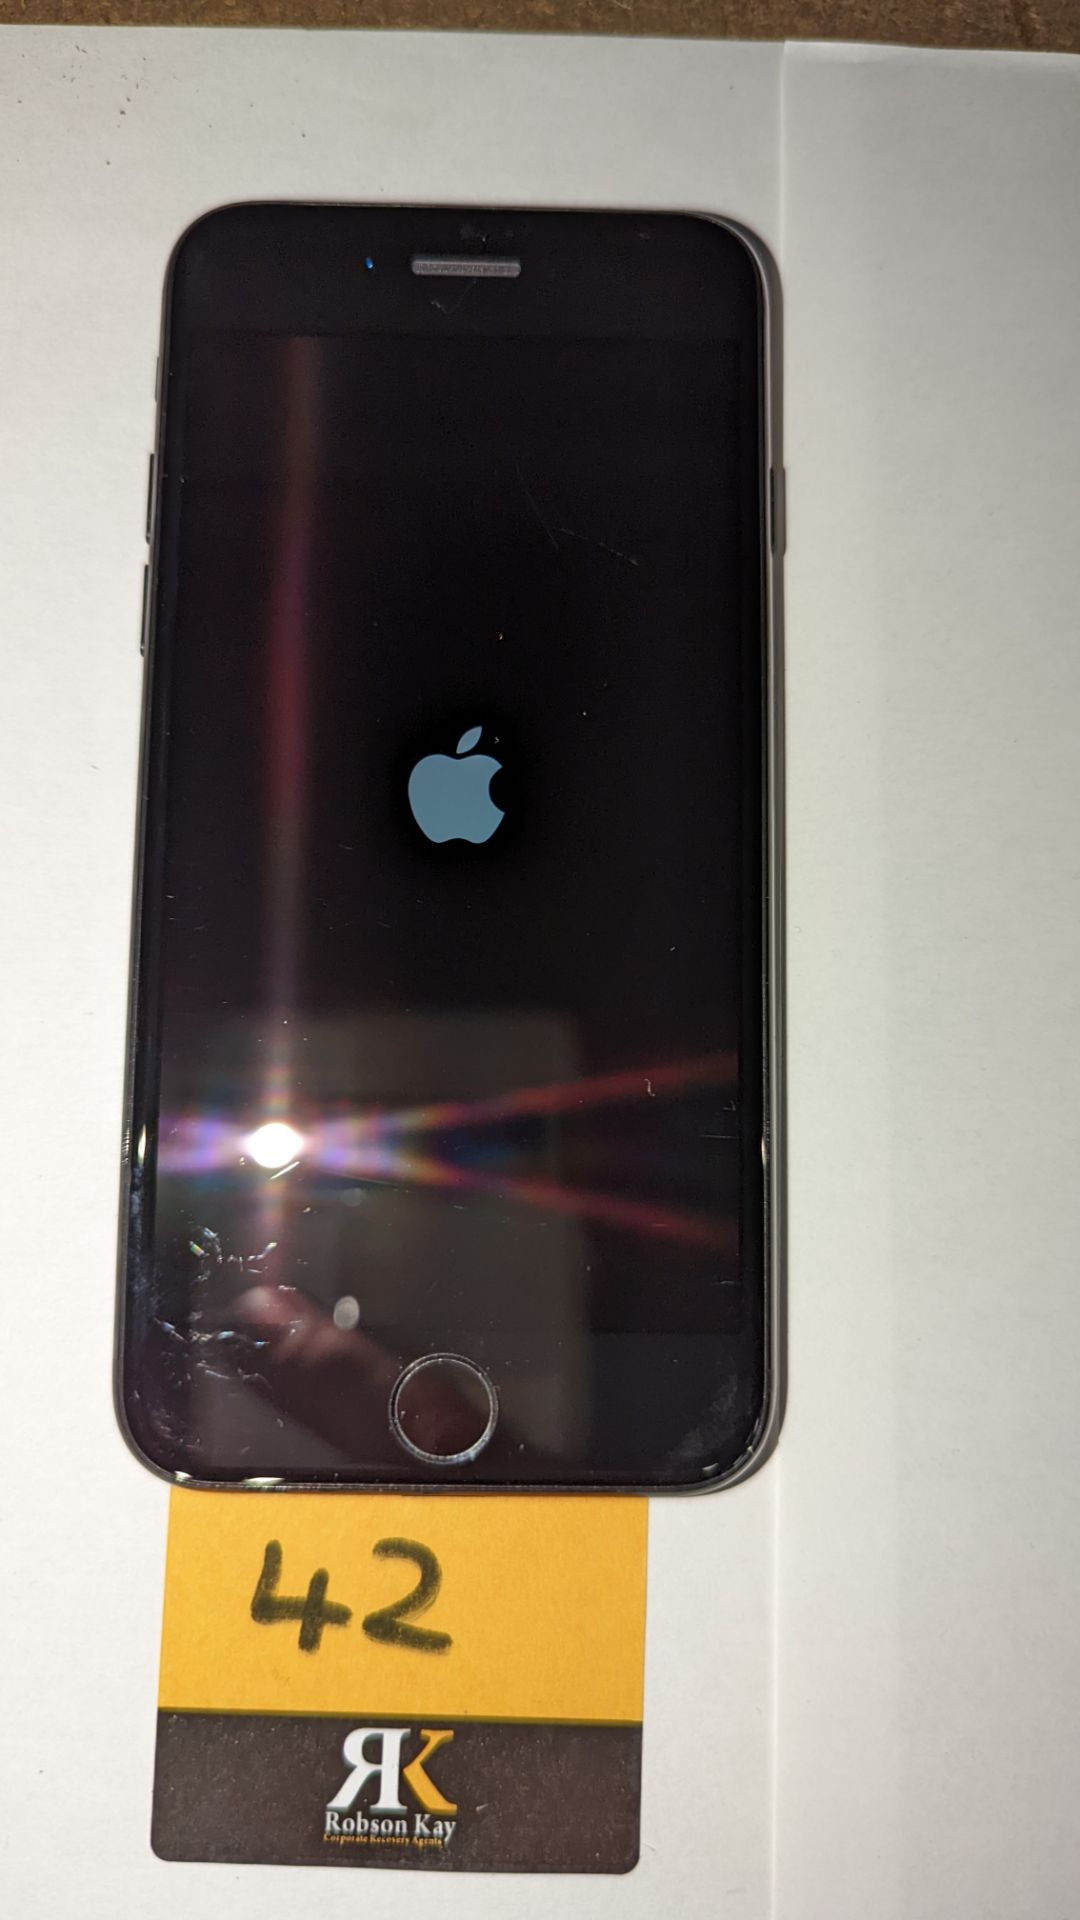 Apple iPhone 7, 32GB capacity, model A1778. No ancillaries or accessories - Image 9 of 10